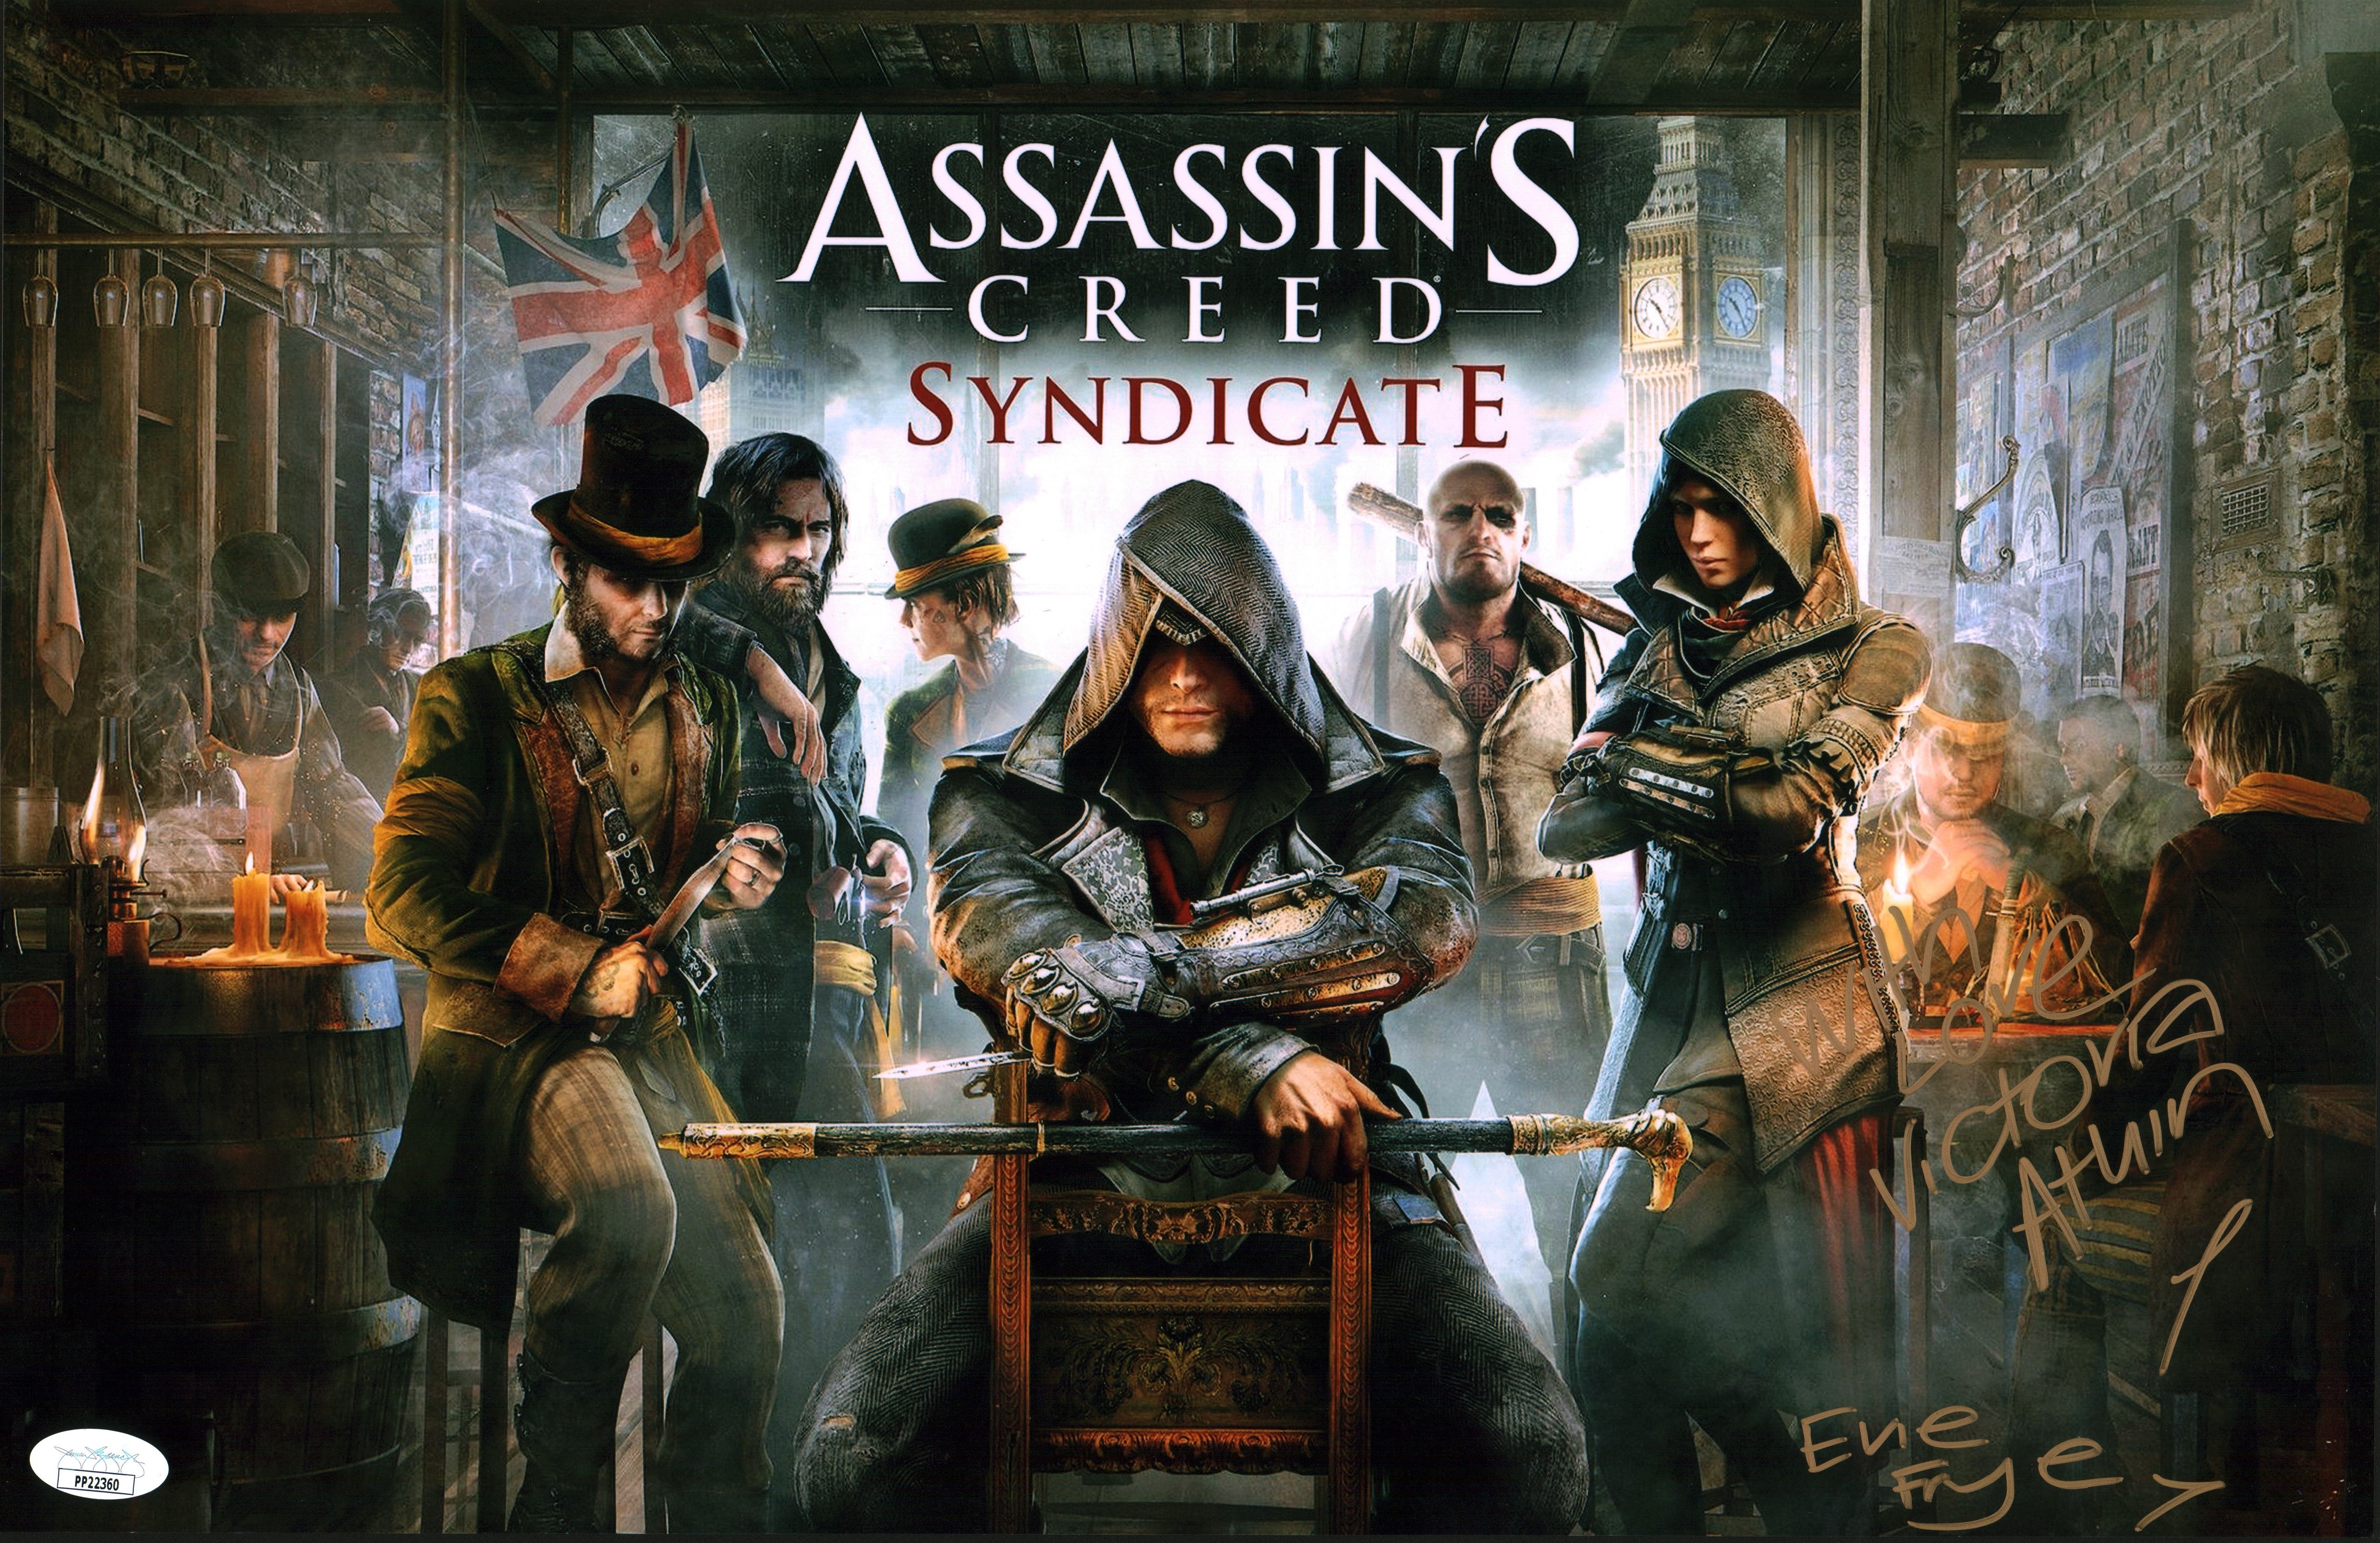 Victoria Atkin Assassin's Creed Syndicate 11x17 Photo Poster Signed Autograph JSA COA Certified Auto